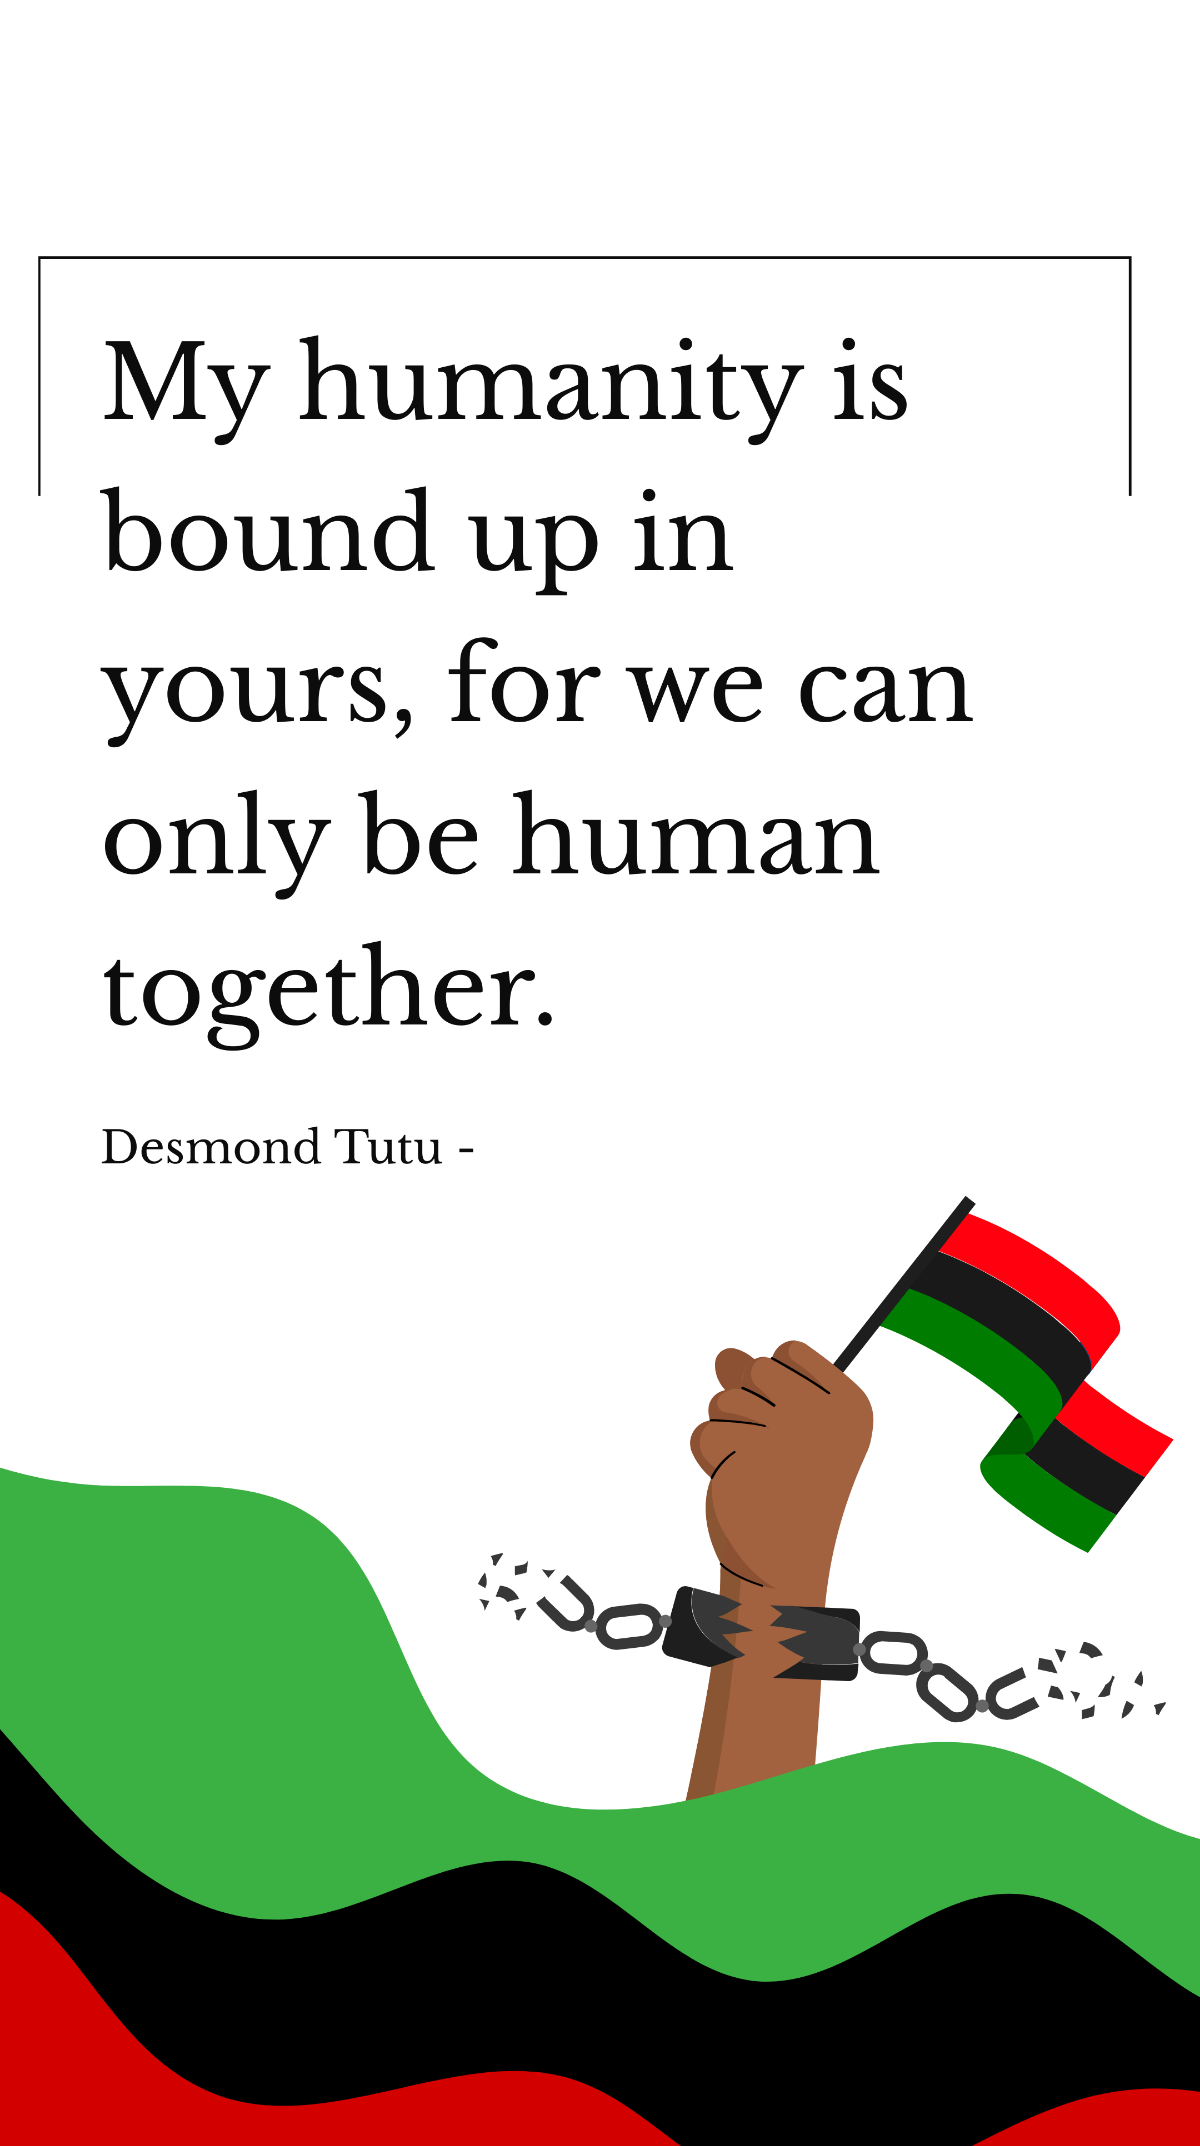 Desmond Tutu - My humanity is bound up in yours, for we can only be human together. Template